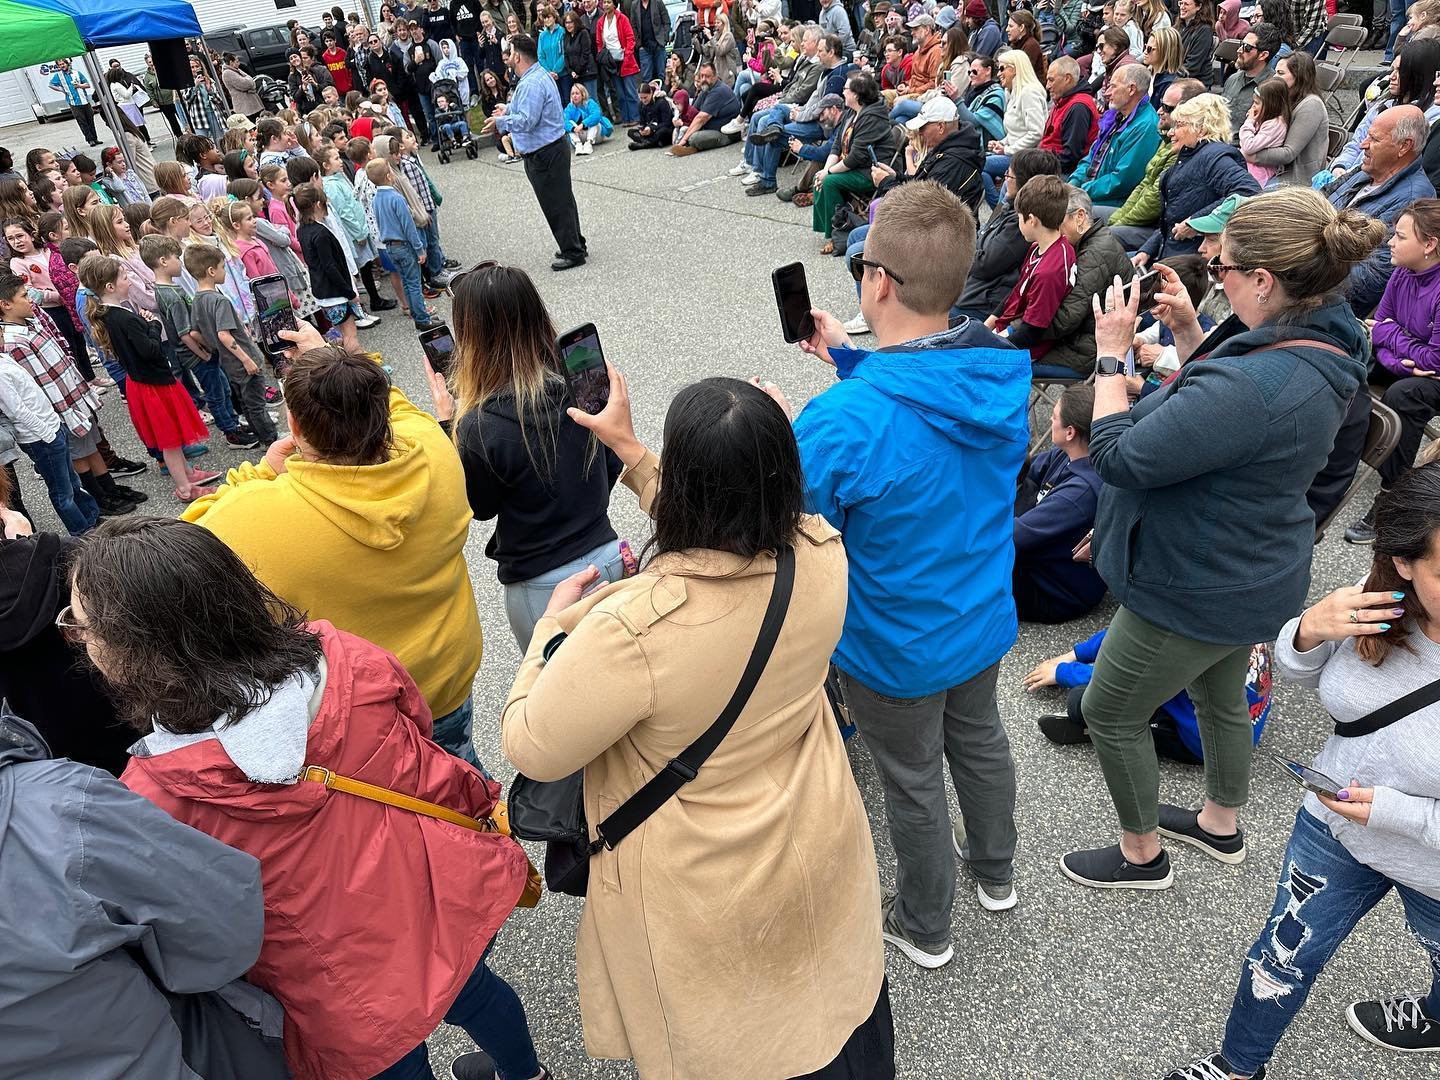 Arts Fest shout out: thank you to all of the FAMILIES who came out together today to see art, hear music, create together, and have fun! You all braved an iffy forecast, and we appreciate you braving the wind and the chill to celebrate your kids.